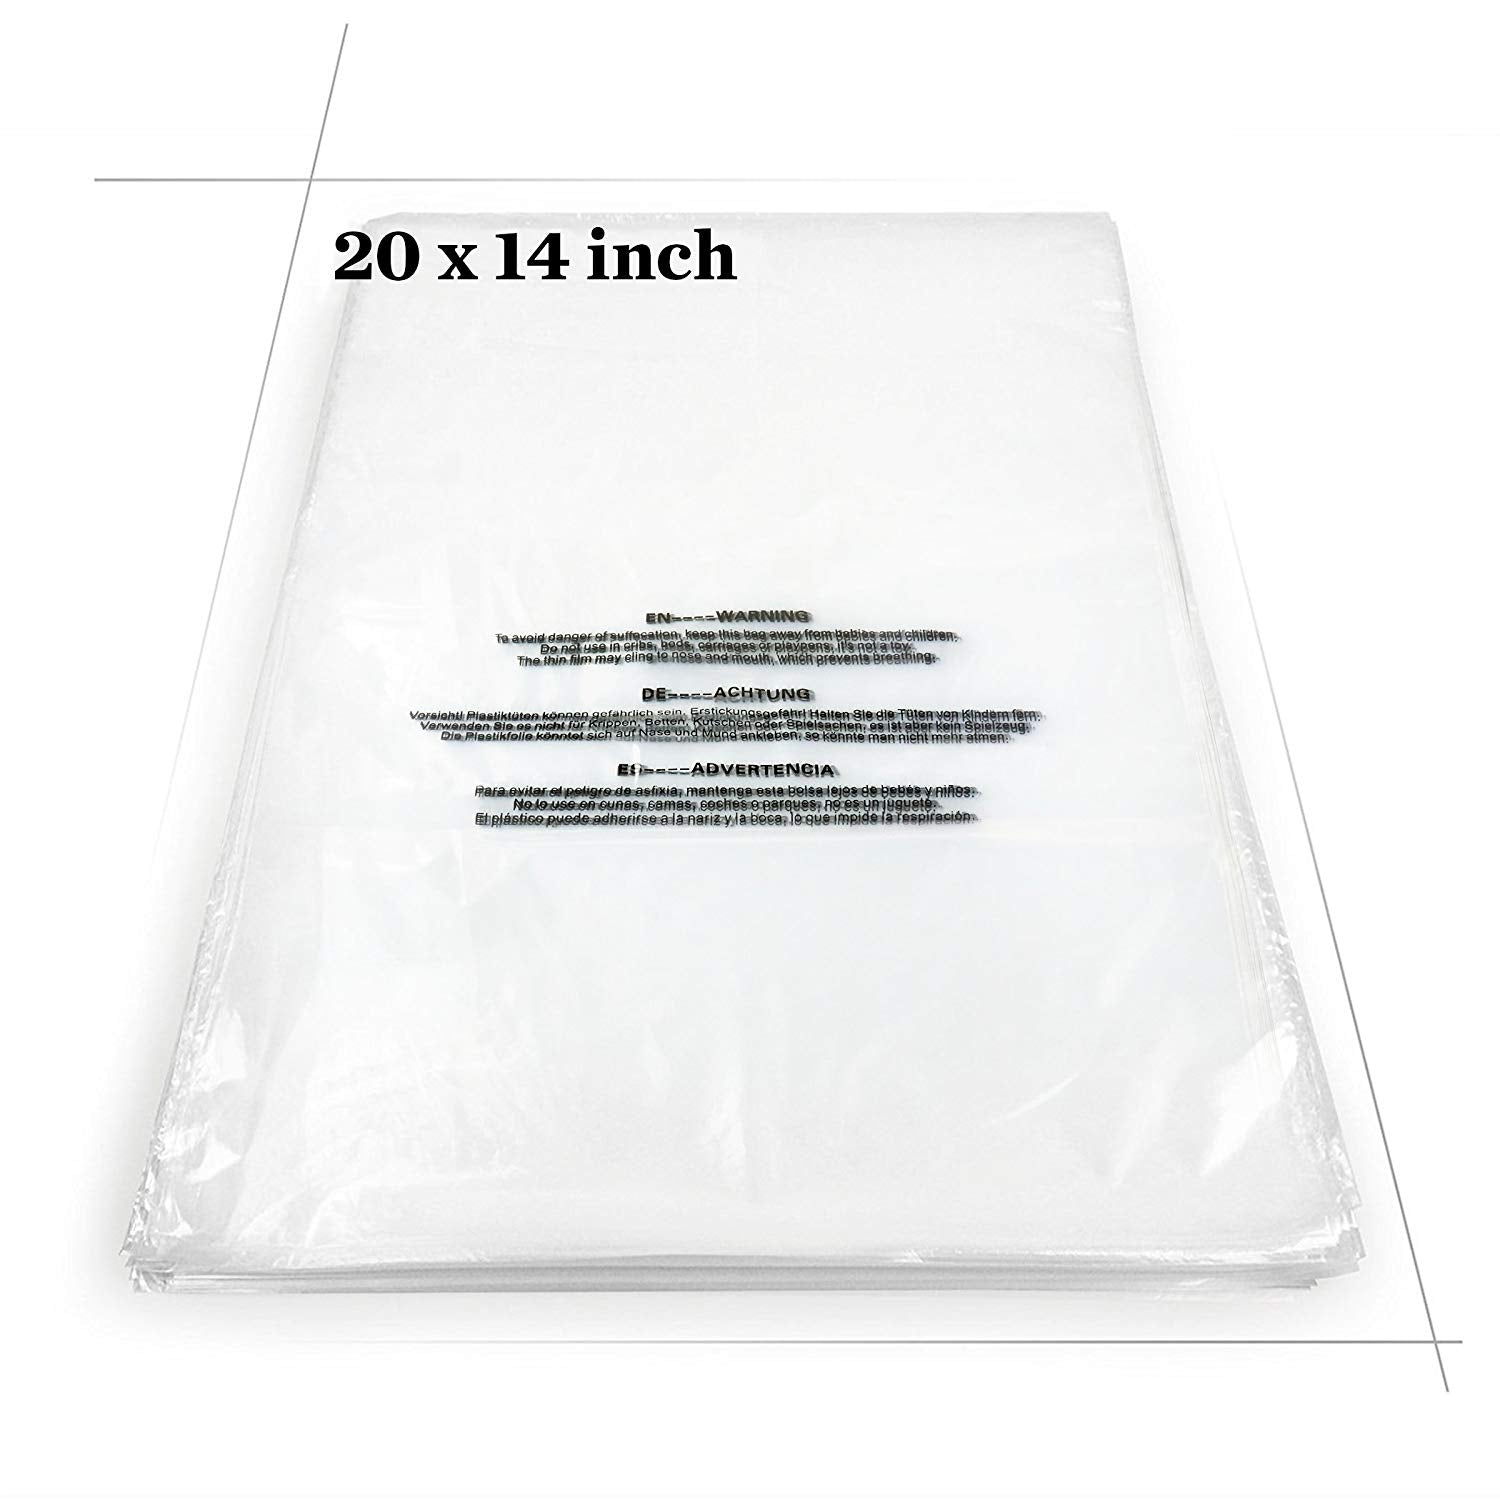 Becko Self Seal Clear Flat Poly Bags with Suffocation Warning for Storing Clothing/Towel/Blanket/Doll (14”x20”) - 100pcs